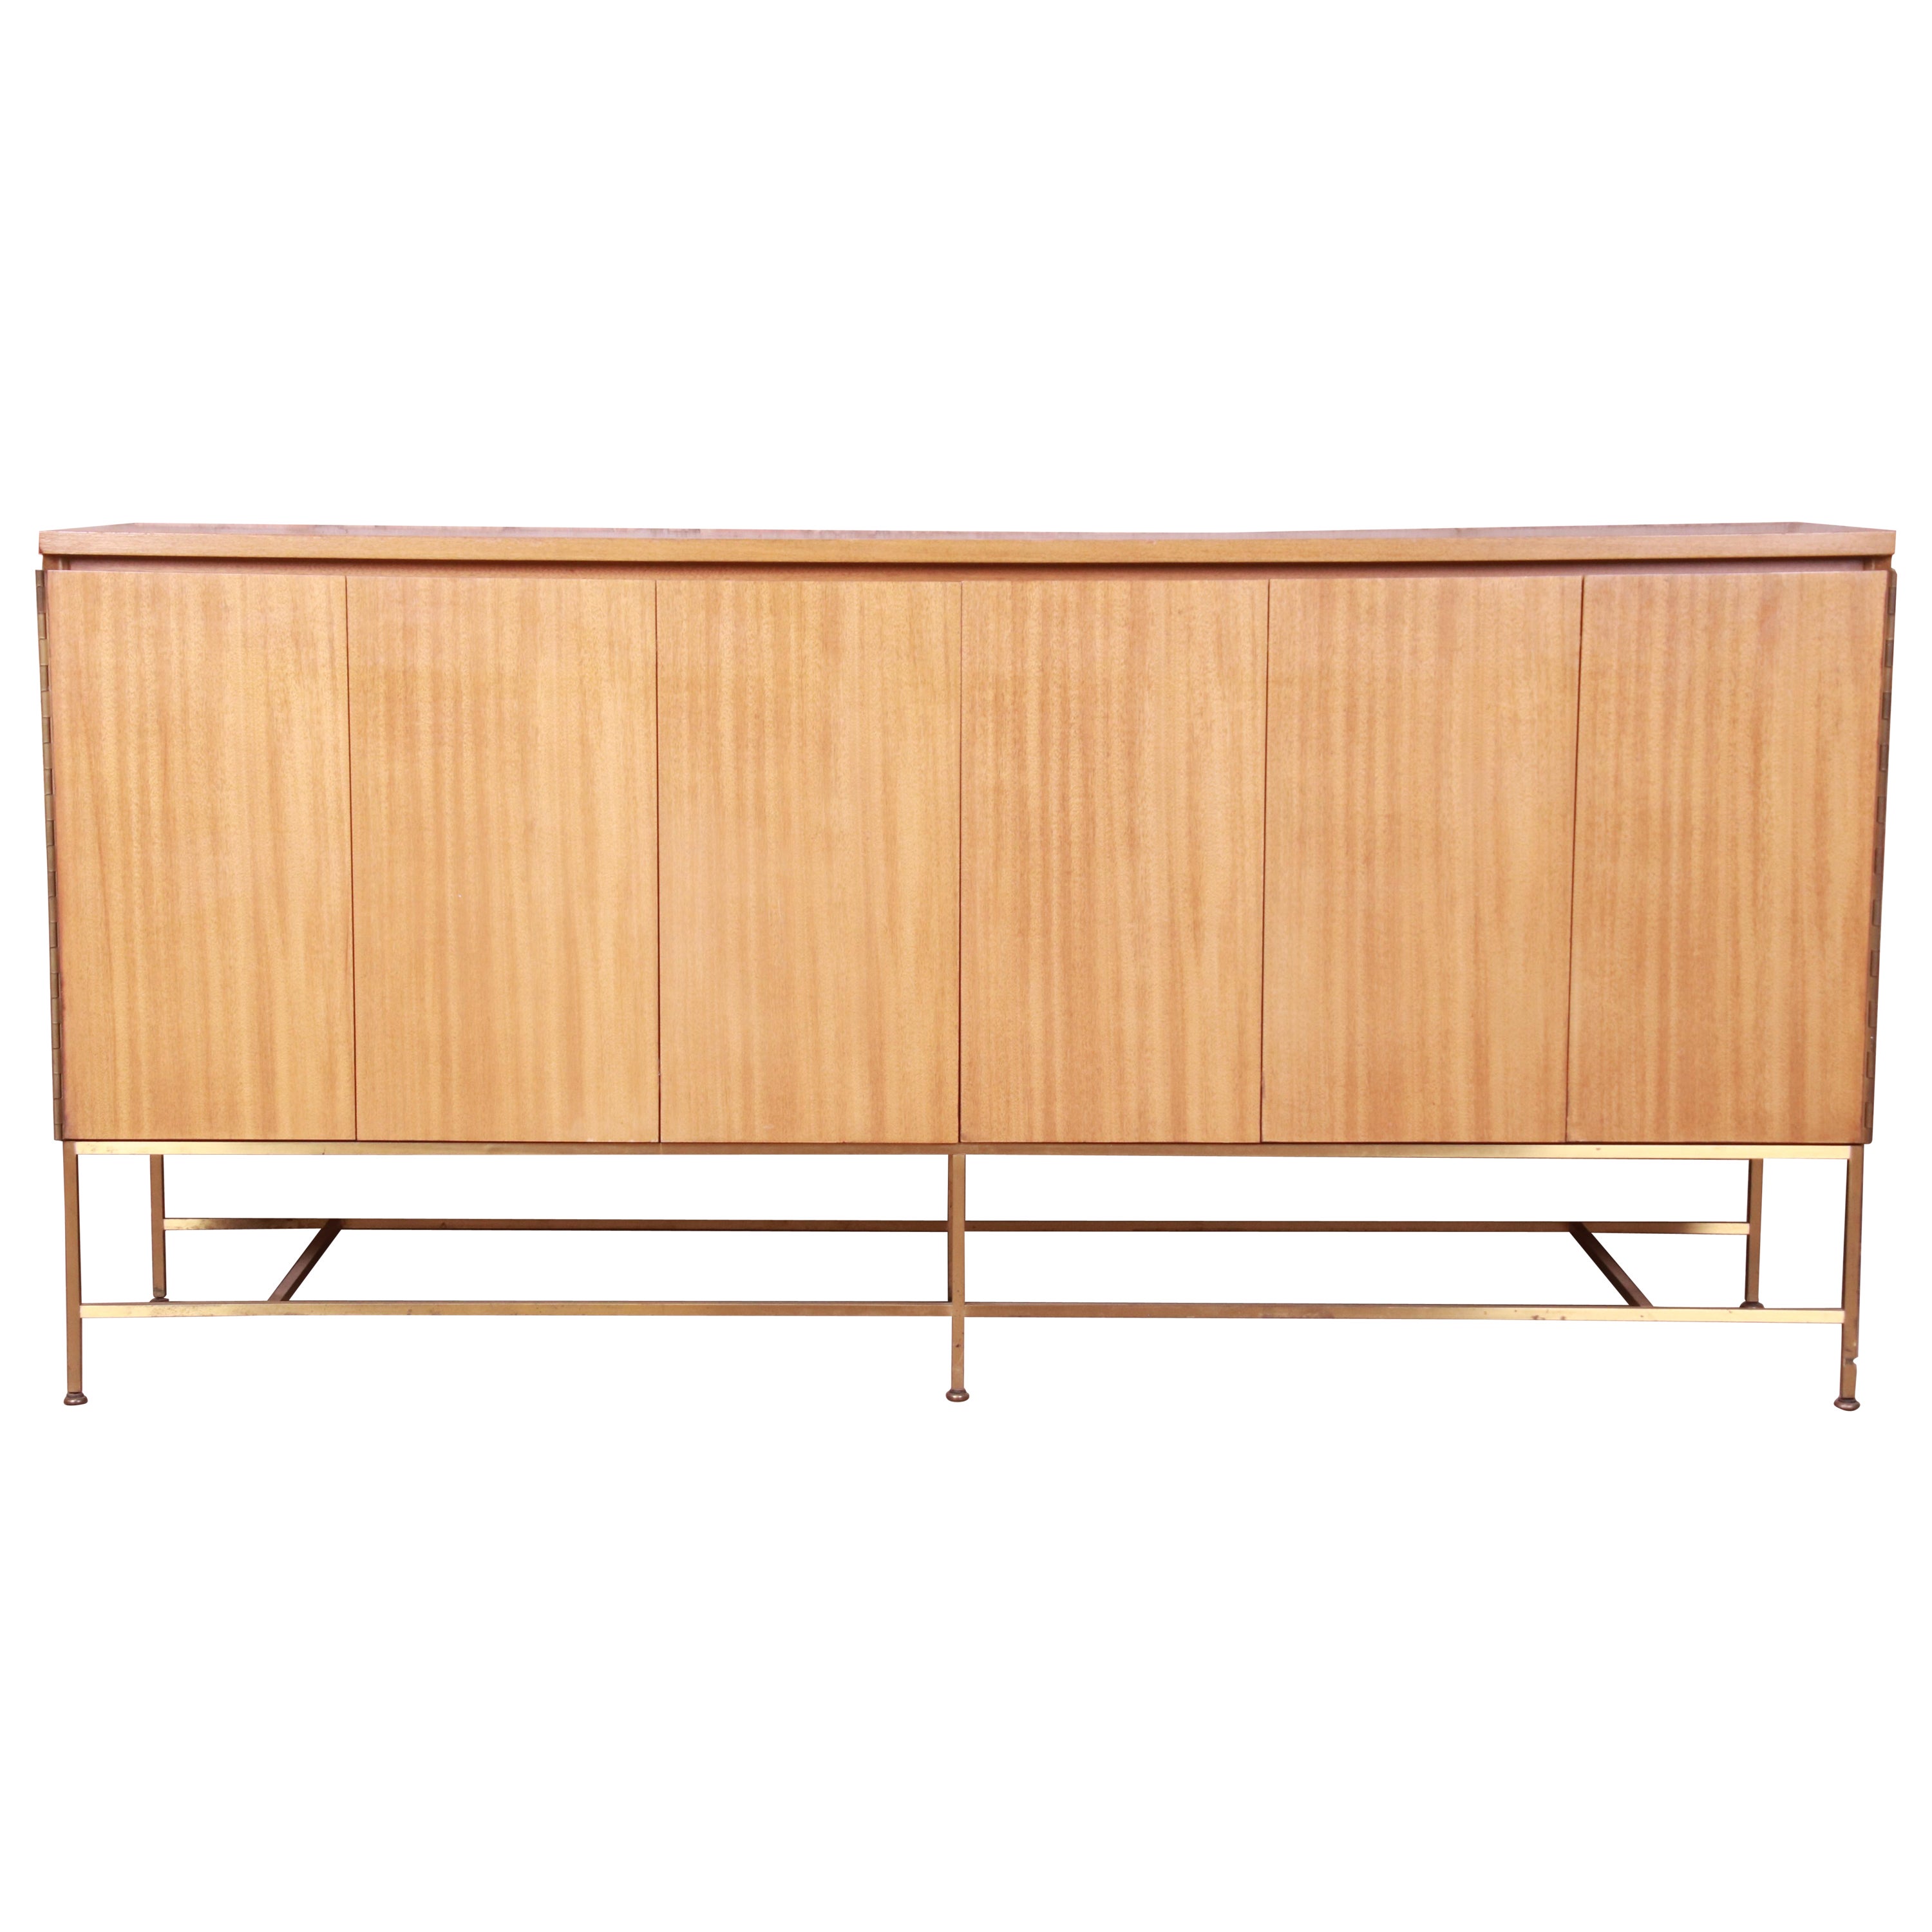 Paul McCobb Irwin Collection Bleached Mahogany and Brass Credenza or Bar Cabinet